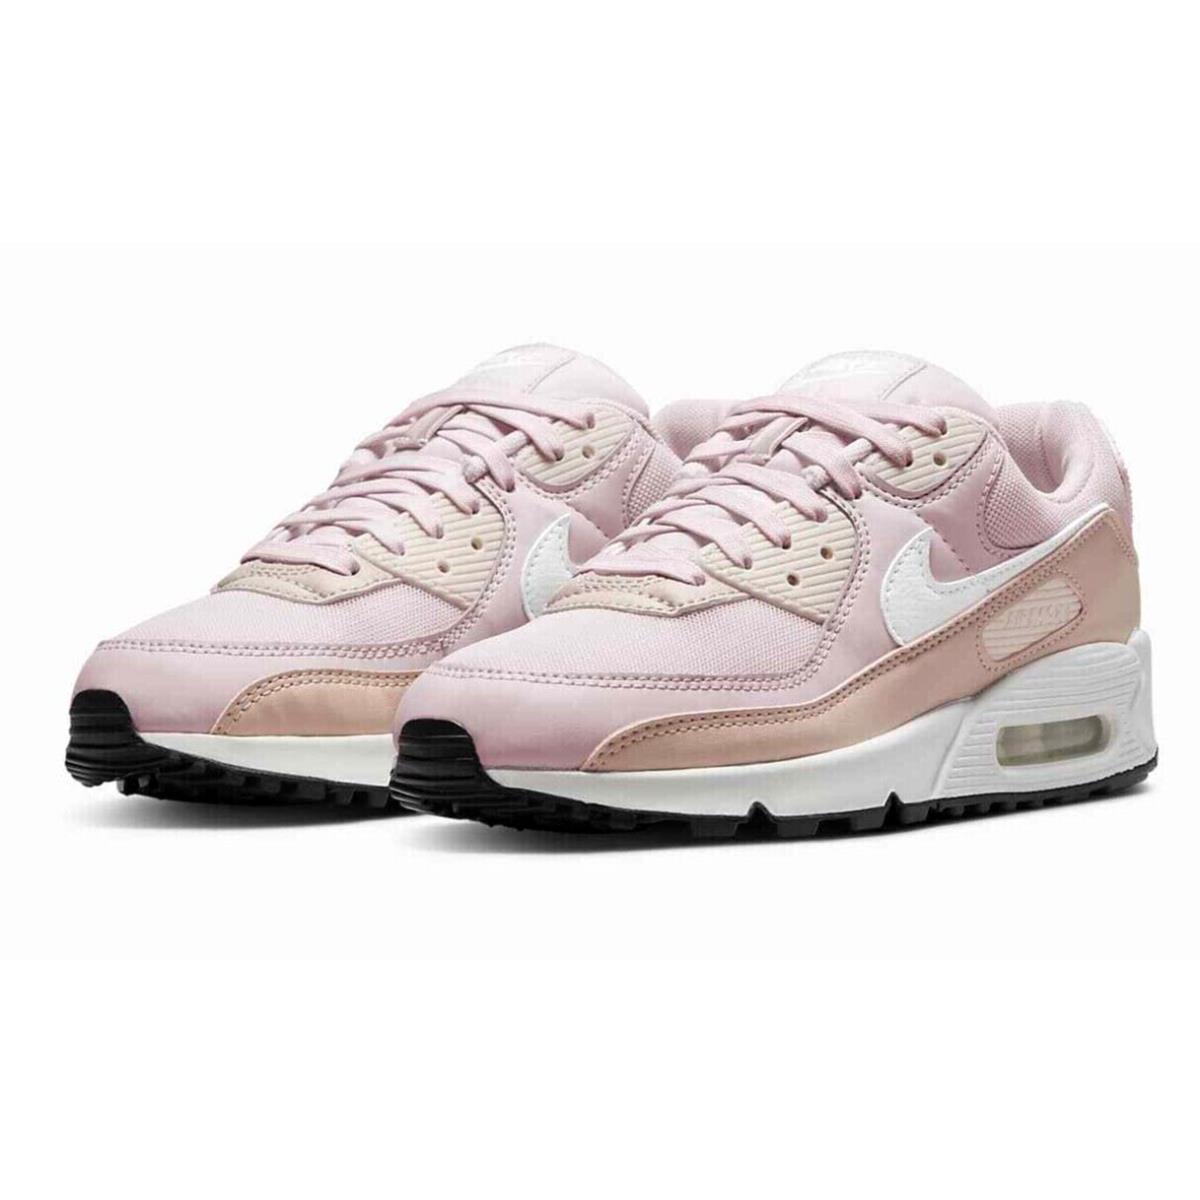 Nike Air Max 90 Mens Size 9.5 Shoes DH8010 600 Pink Oxford Bearly Rose Black